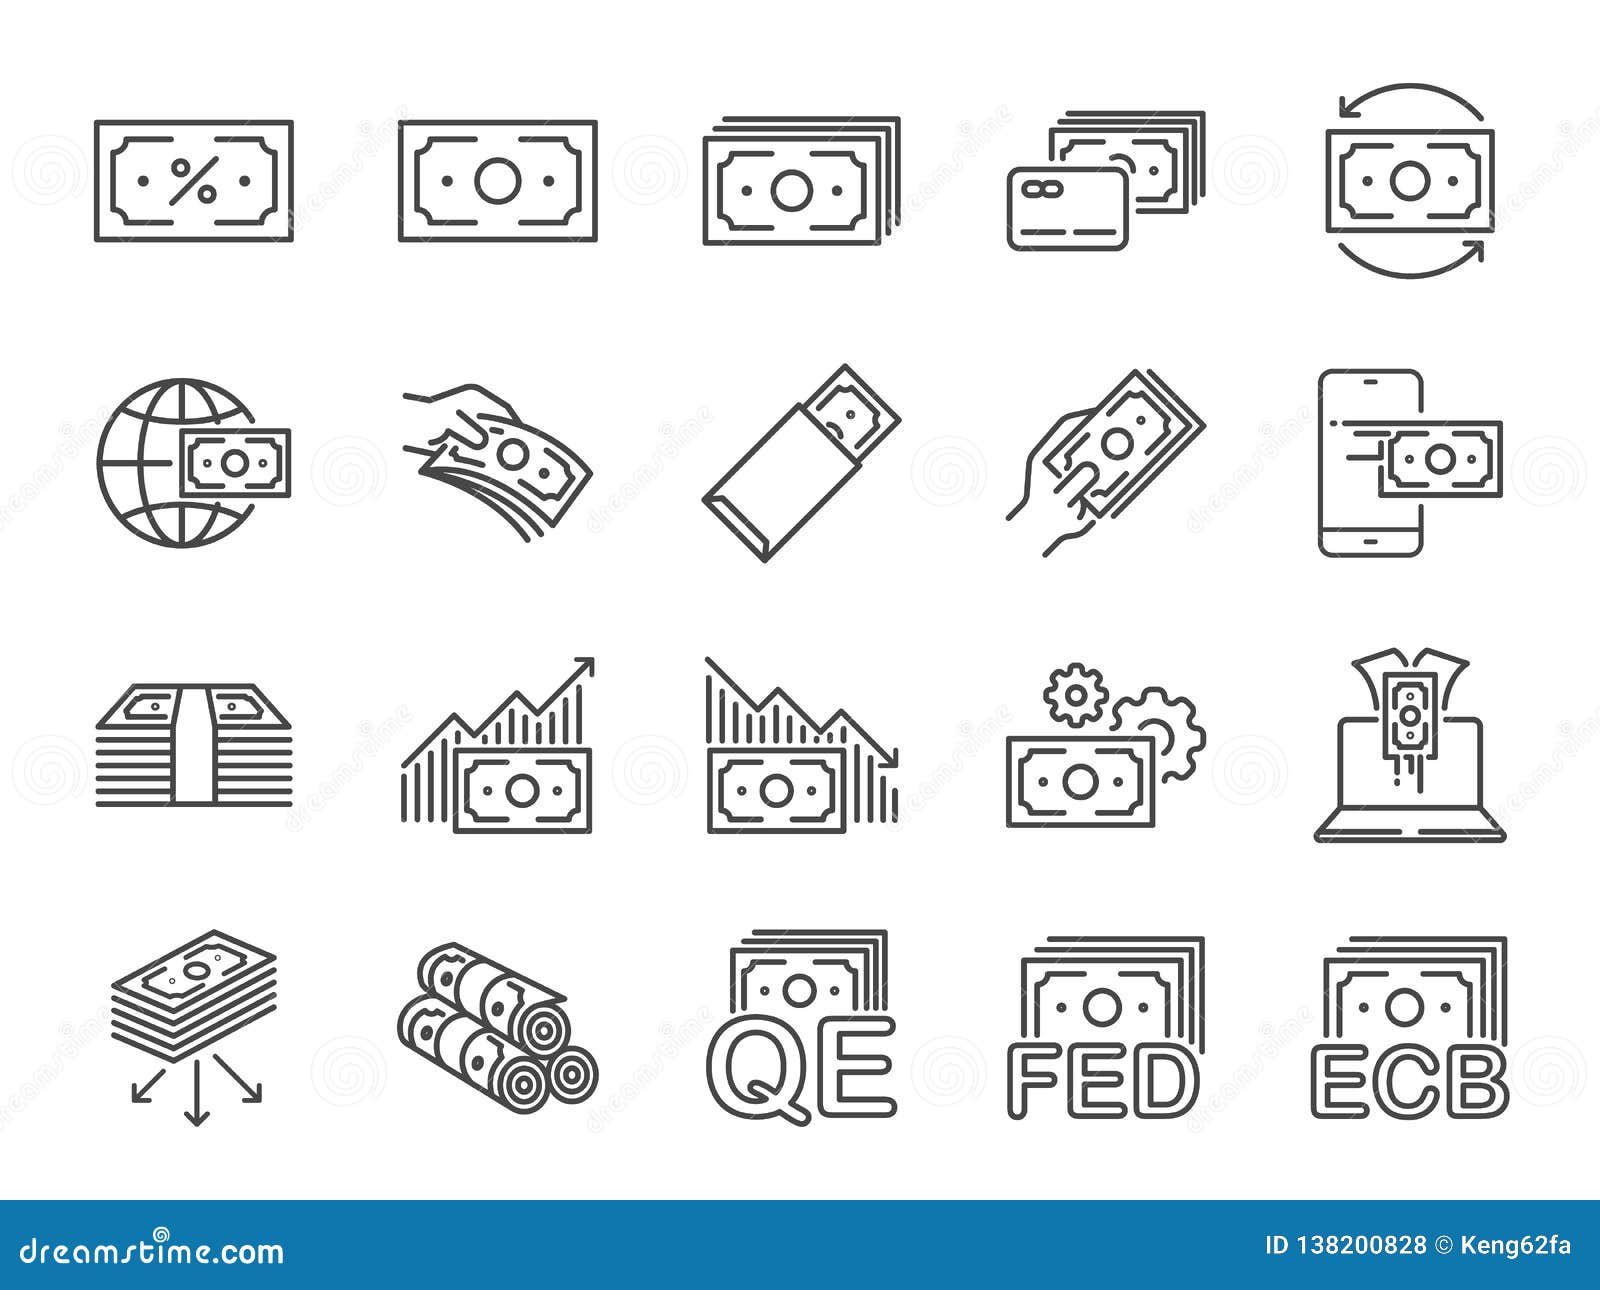 money line icon set. included icons as cash, passive income, bank, banknote, currency and more.